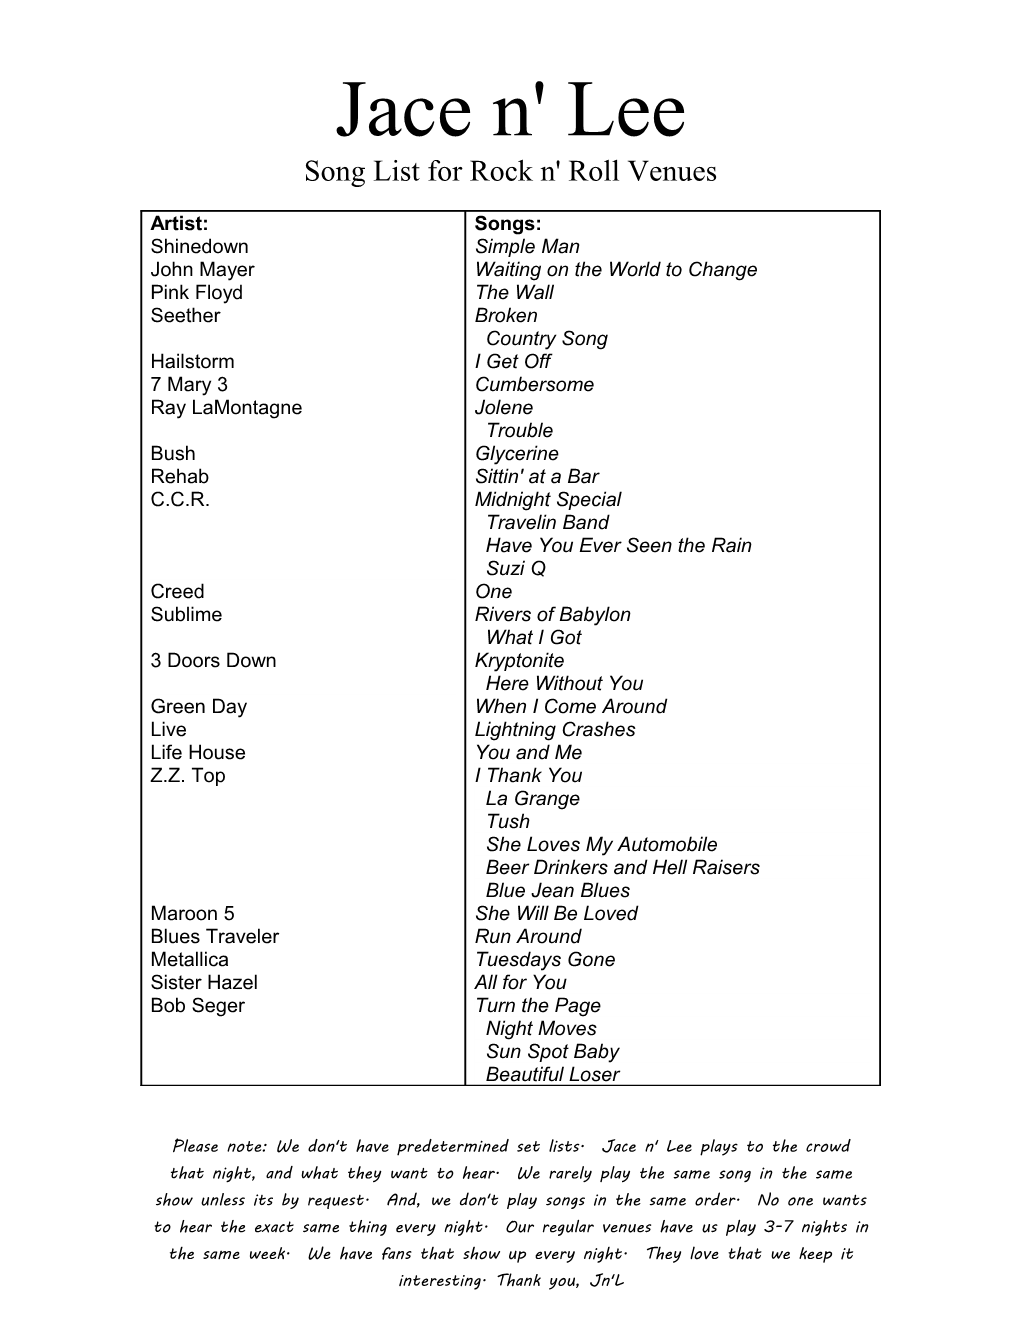 Song List for Rock N' Roll Venues